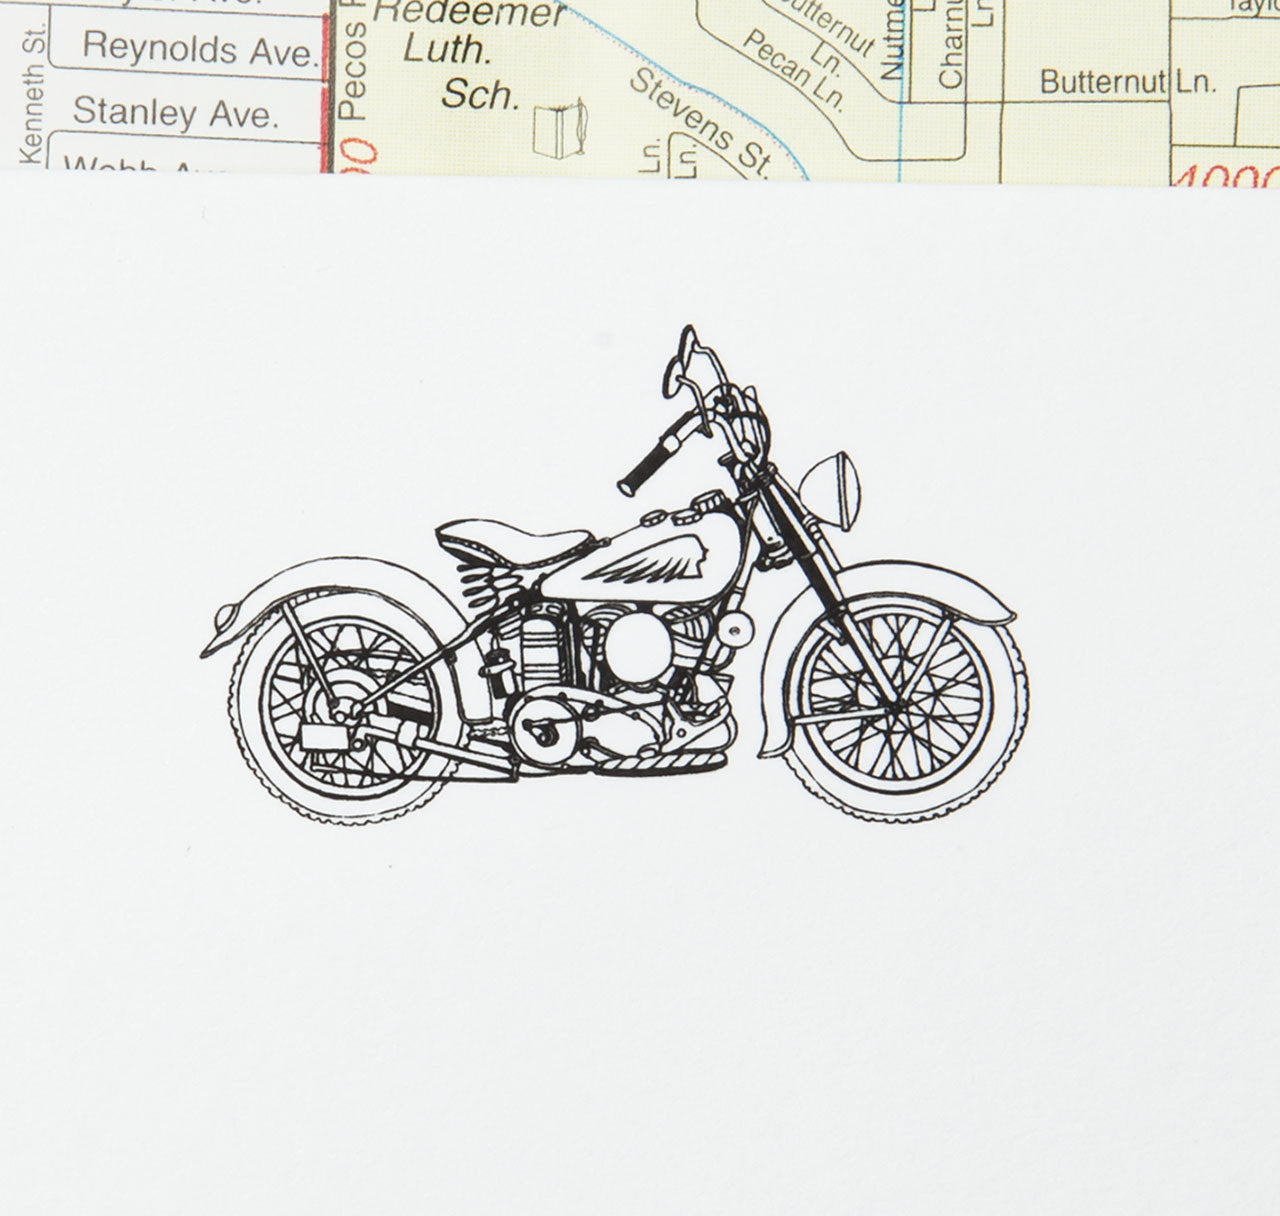 Terrapin Stationers Indian Motorcycle Stationery Set